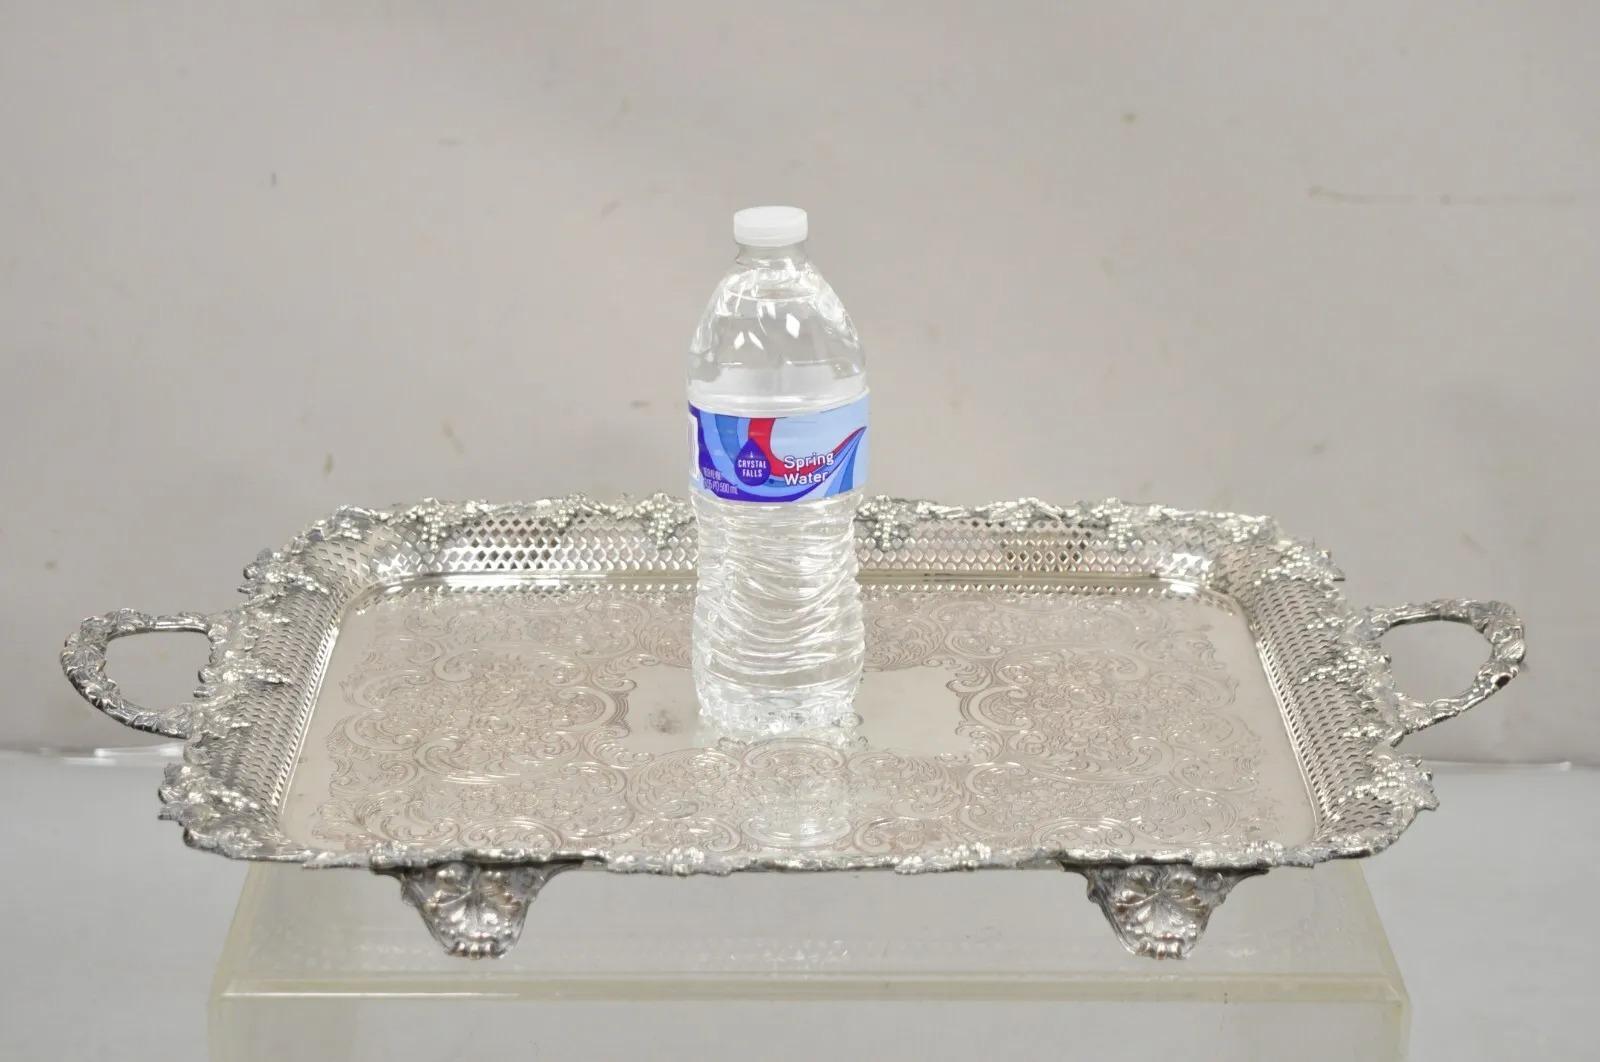 Antique Victorian Pierced Grapevine Basket Gallery Serving Platter Tray. Item featured has a ,monogram to center illegible, possibly 